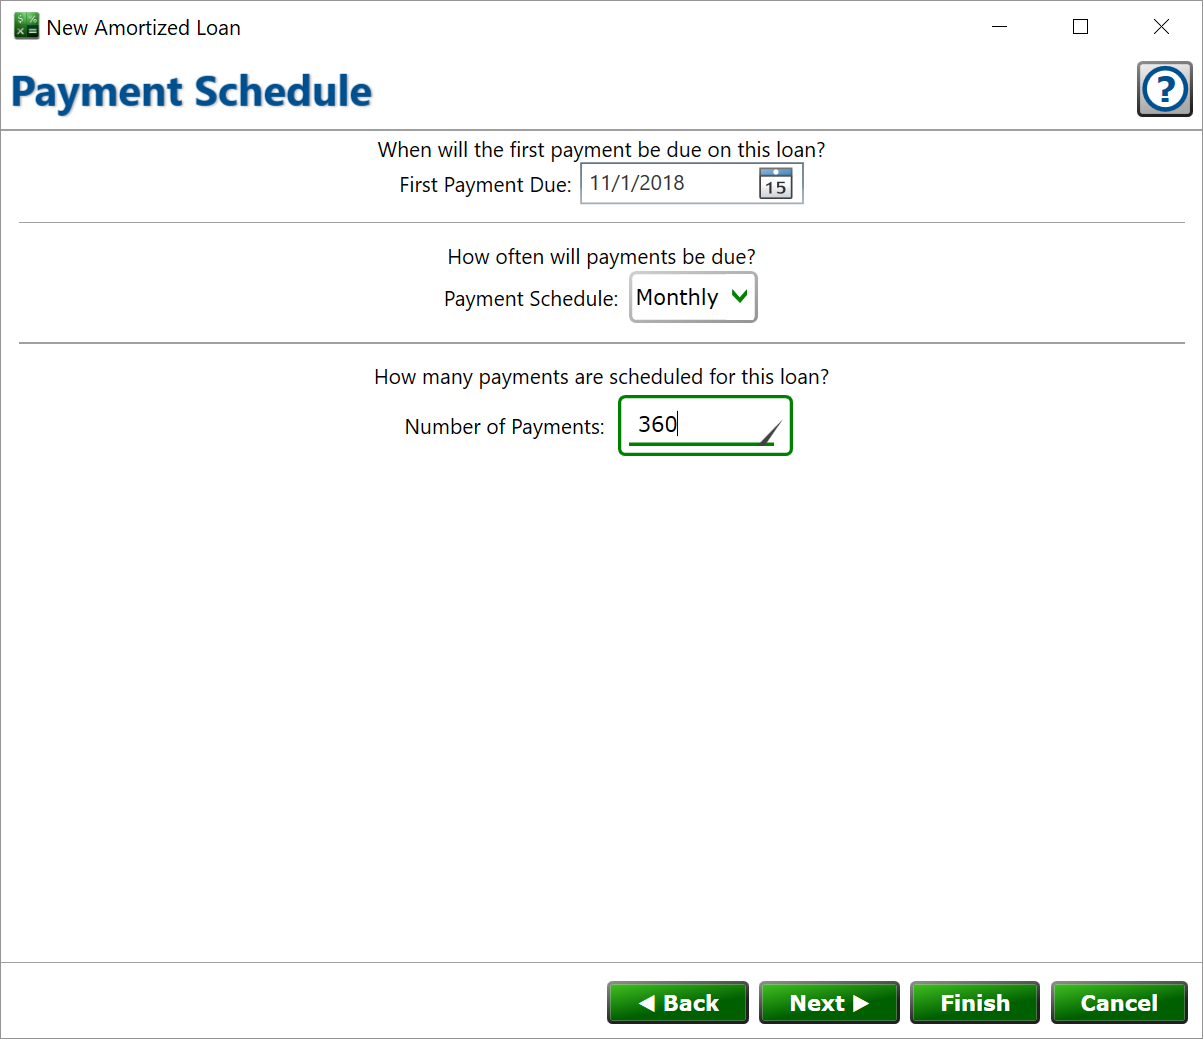 Image of Moneylender in the Amortized Loan Wizard with the payment count set to 360